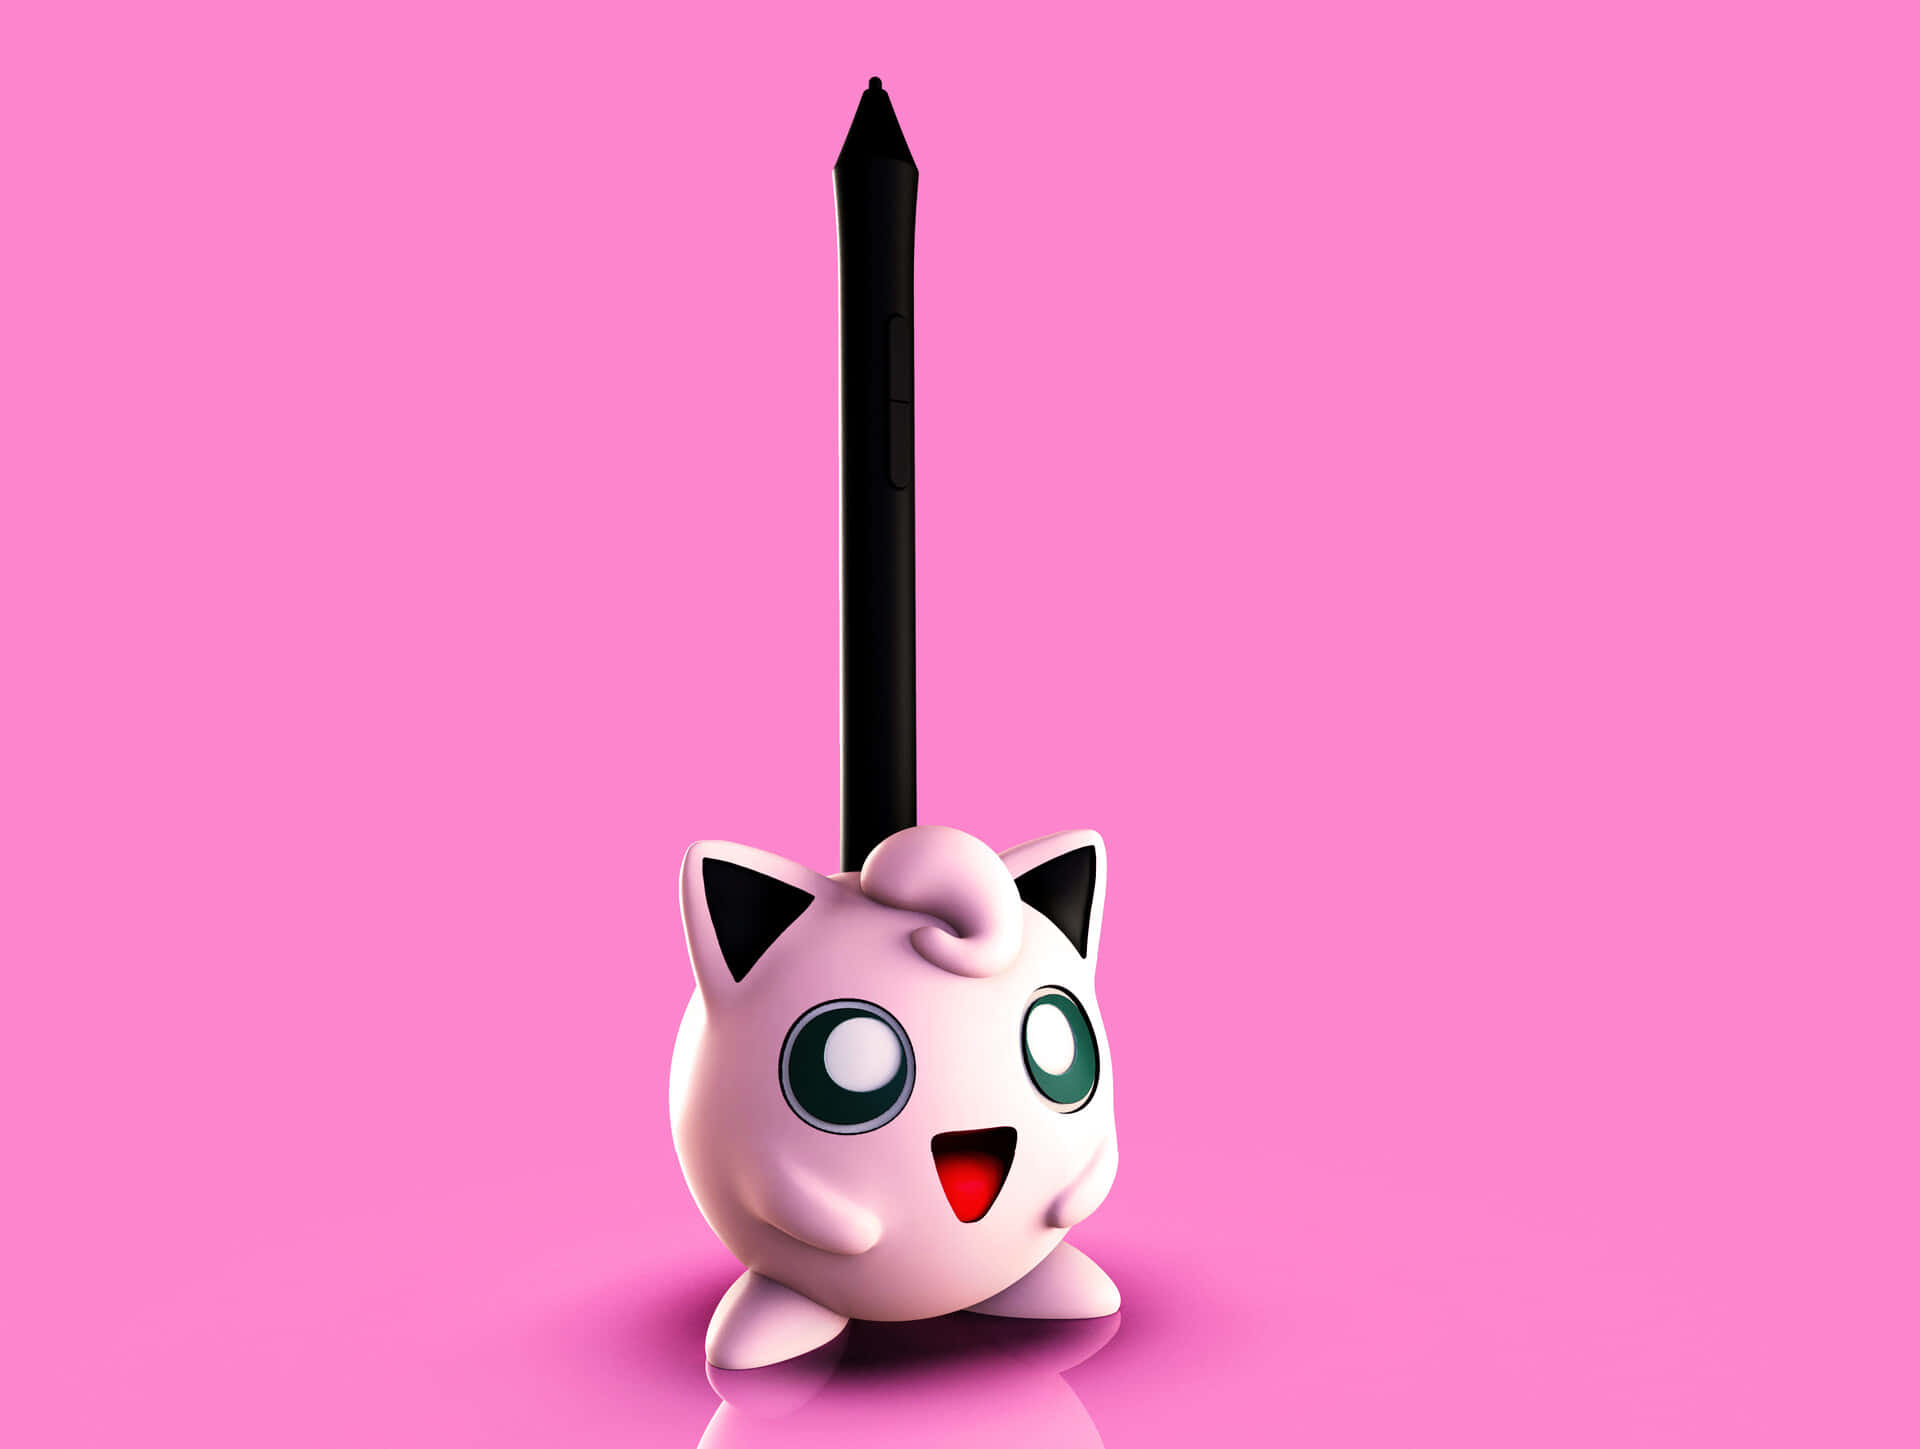 "Get ready to be lulled to a peaceful sleep with the sweet sounds of Jigglypuff!"